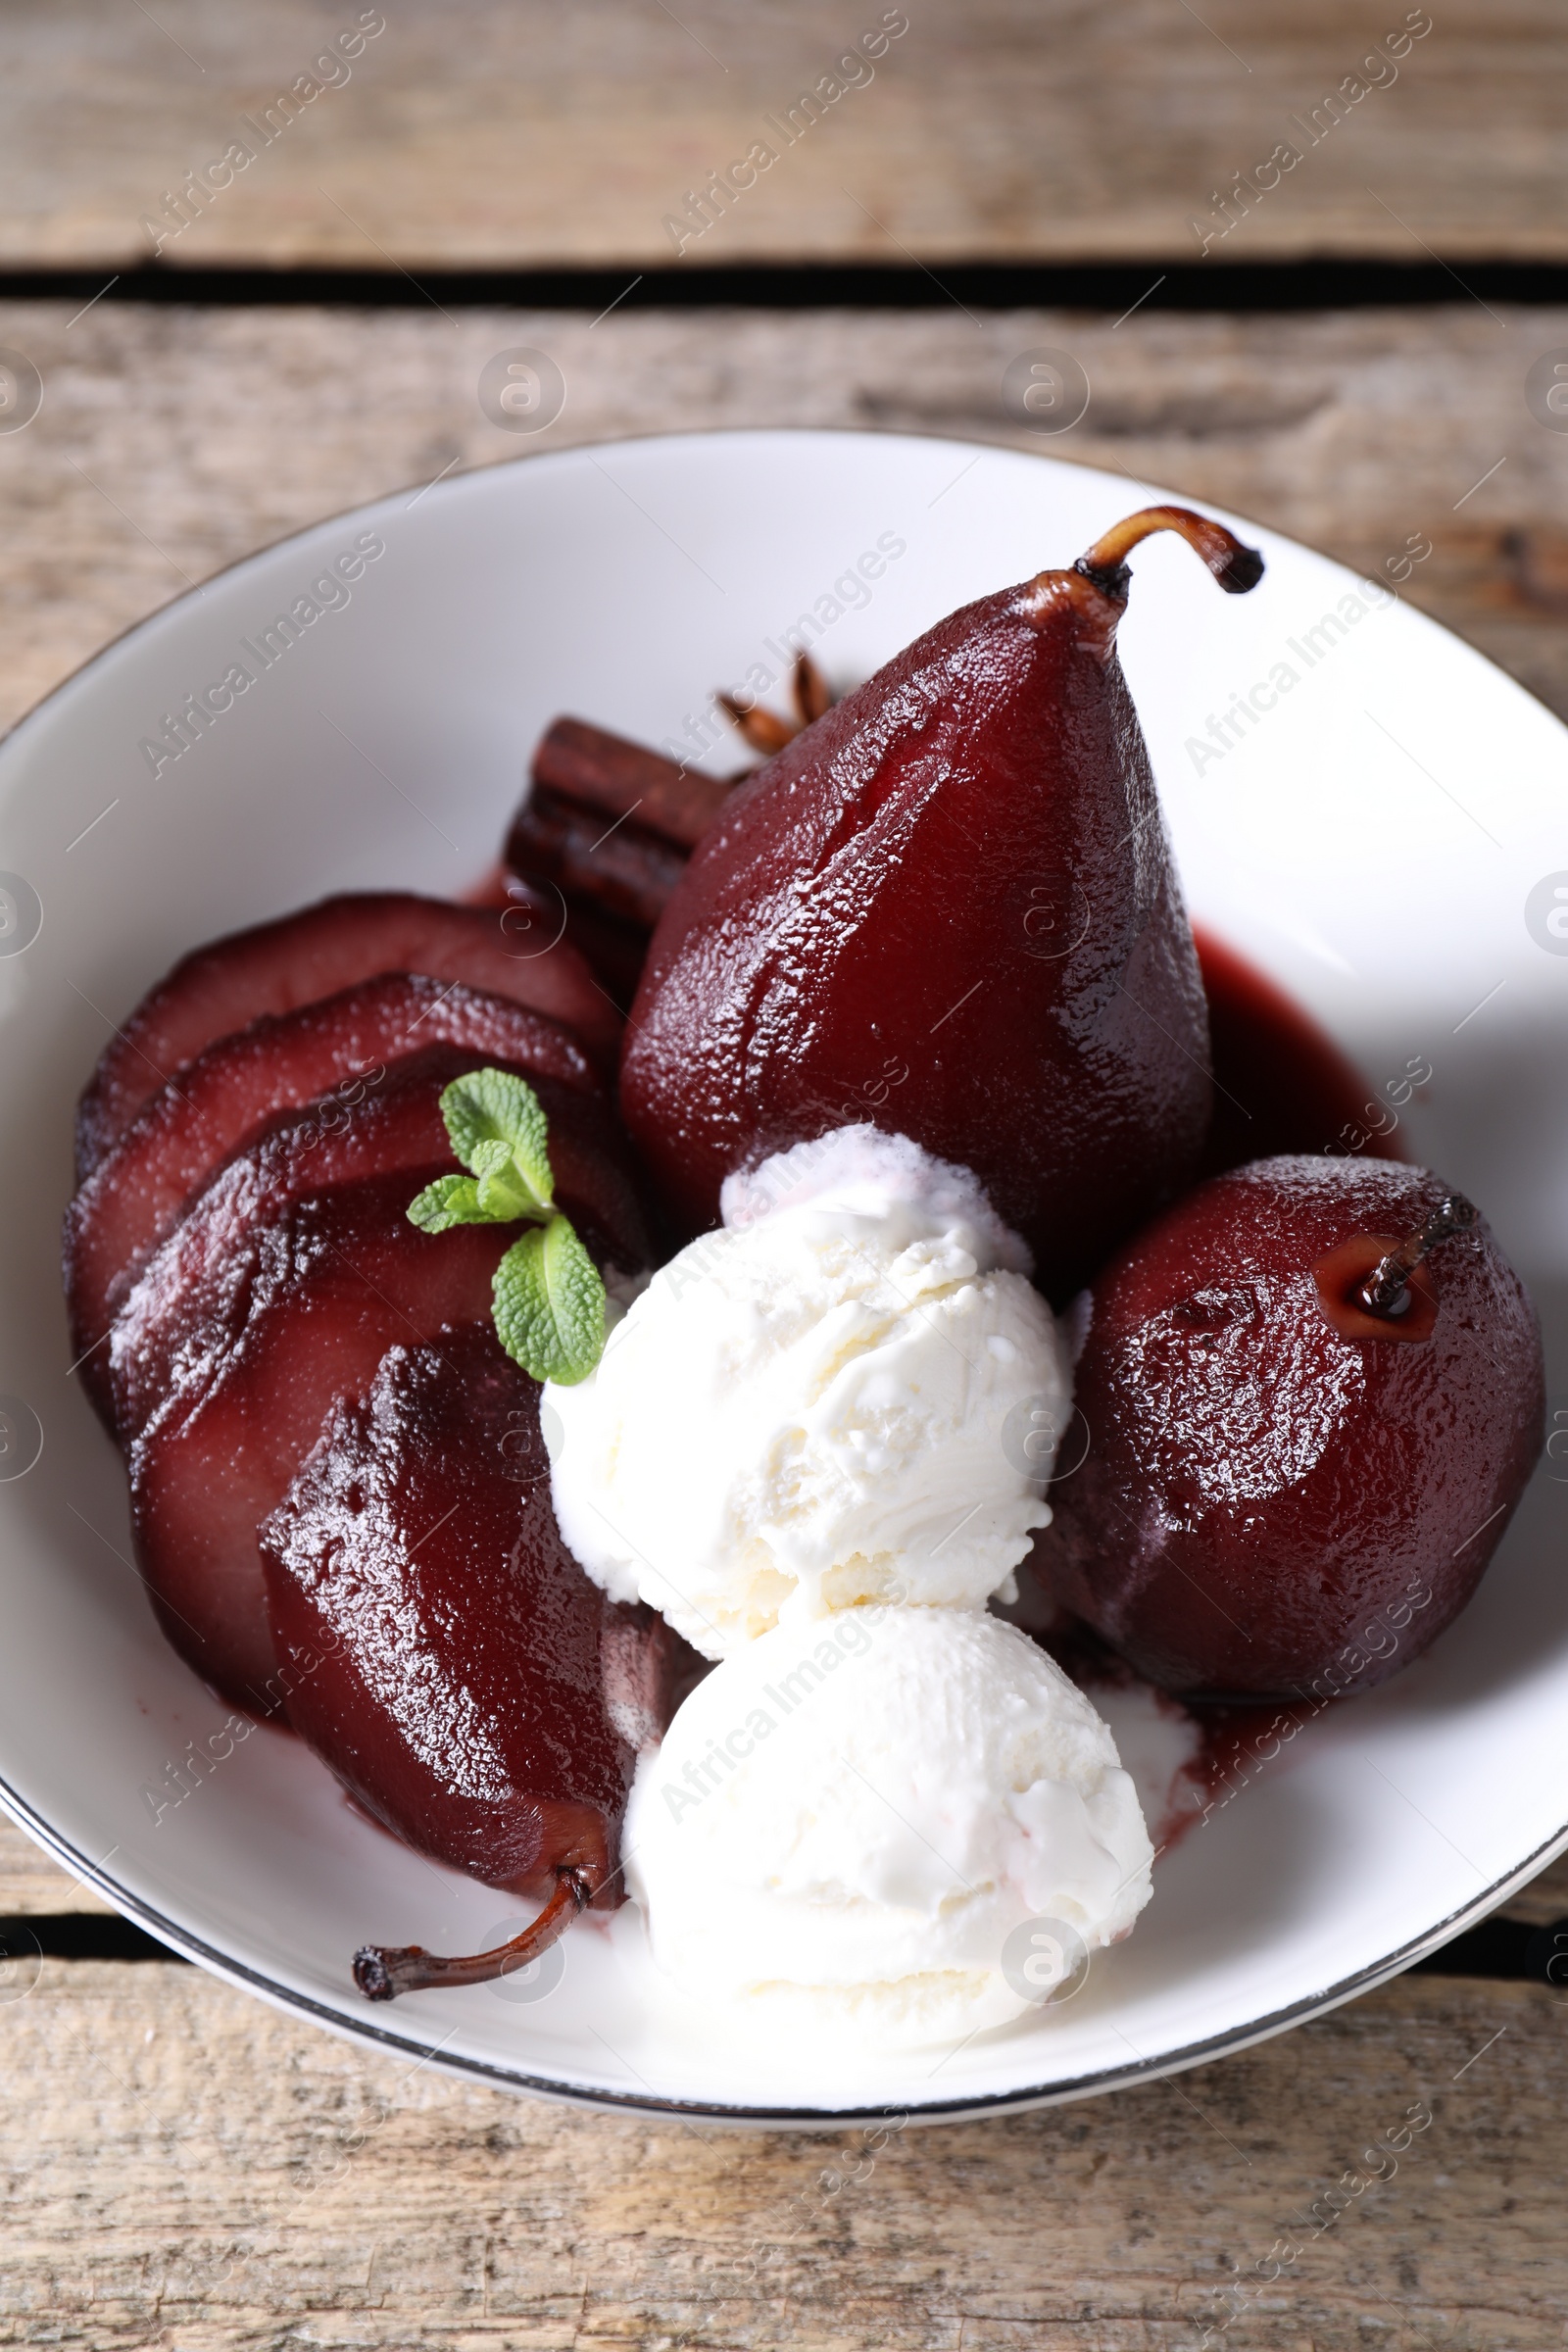 Photo of Tasty red wine poached pears and ice cream in bowl on wooden table, above view